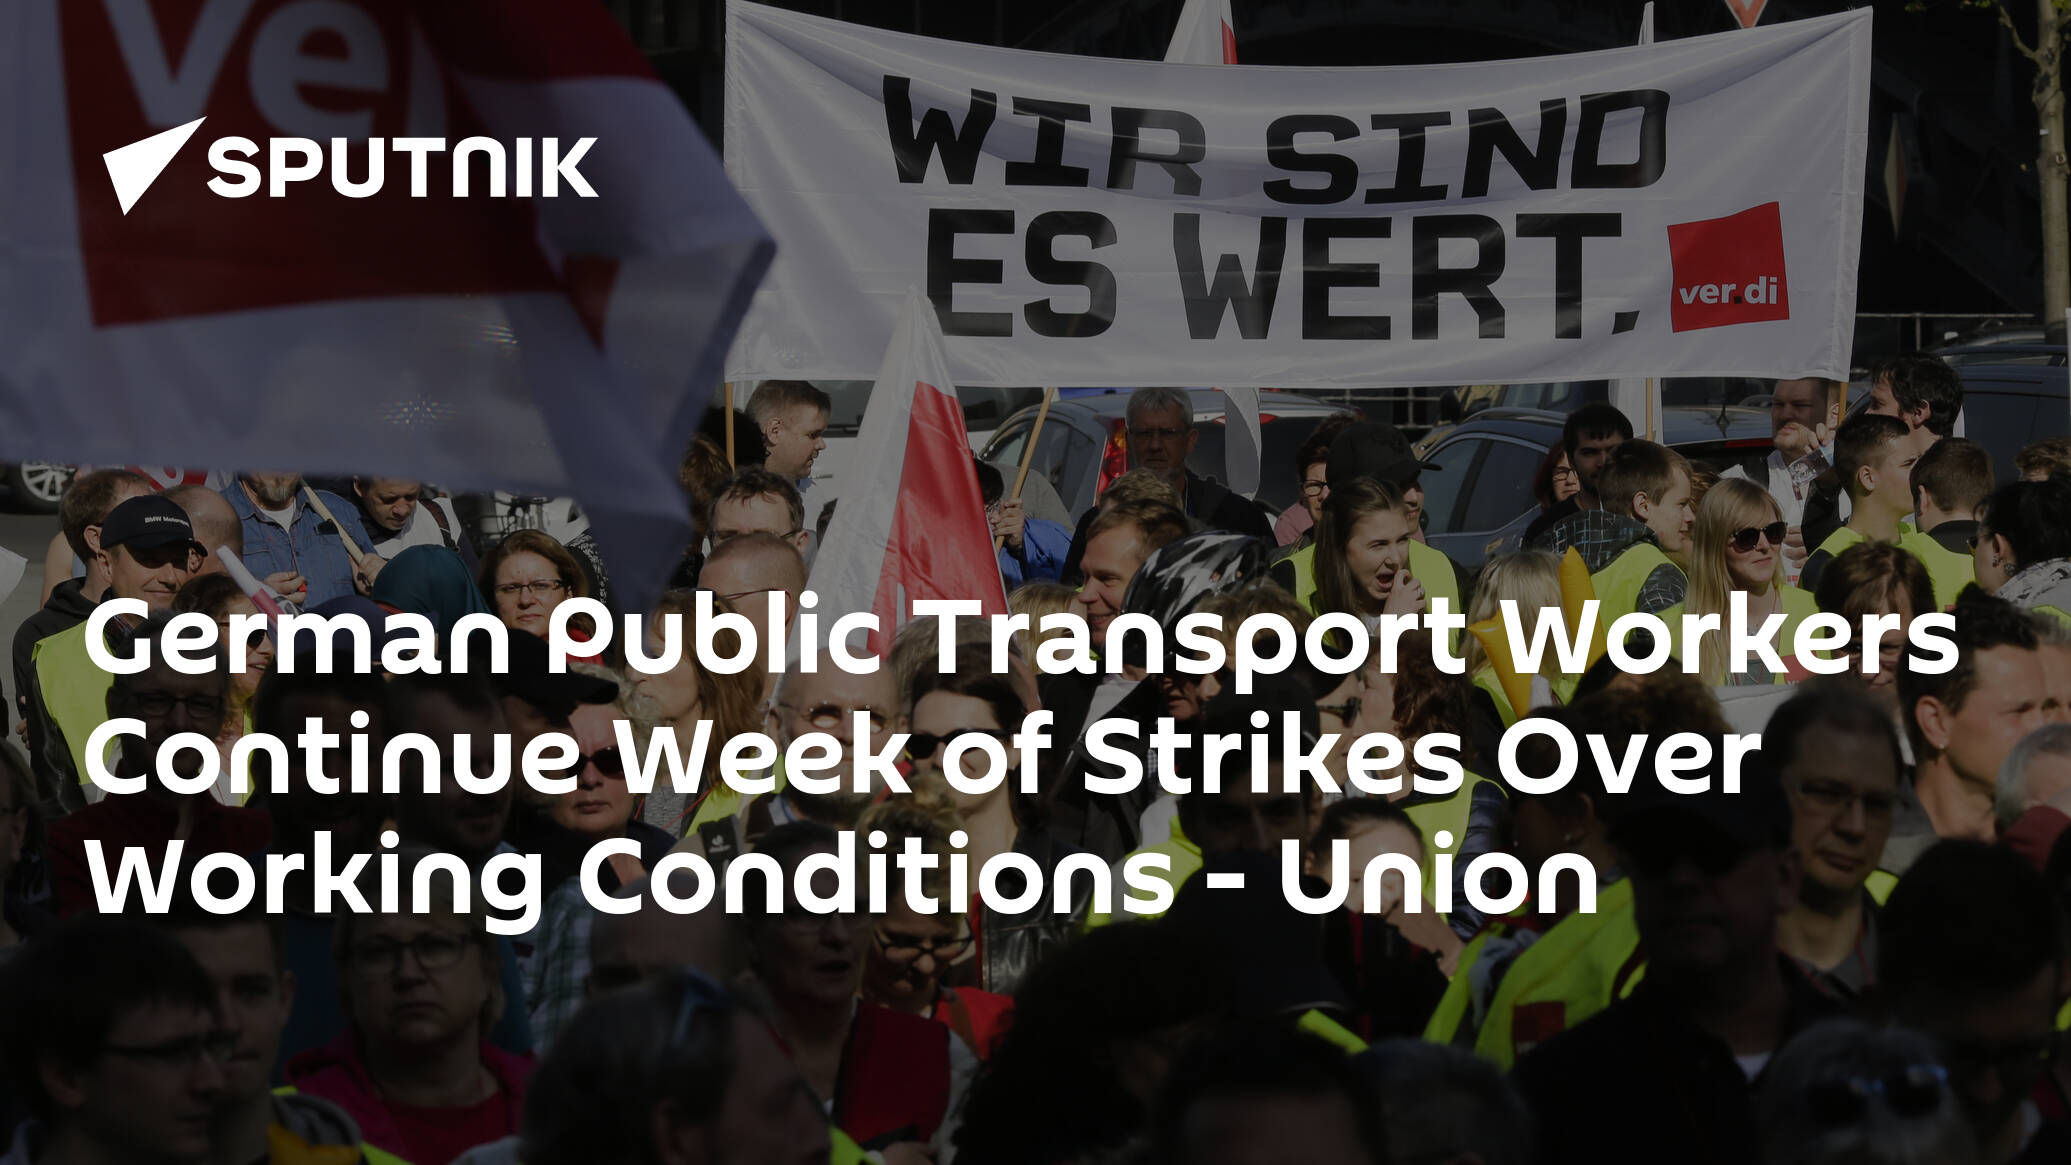 German Public Transport Workers Continue Week of Strikes Over Working Conditions – Union